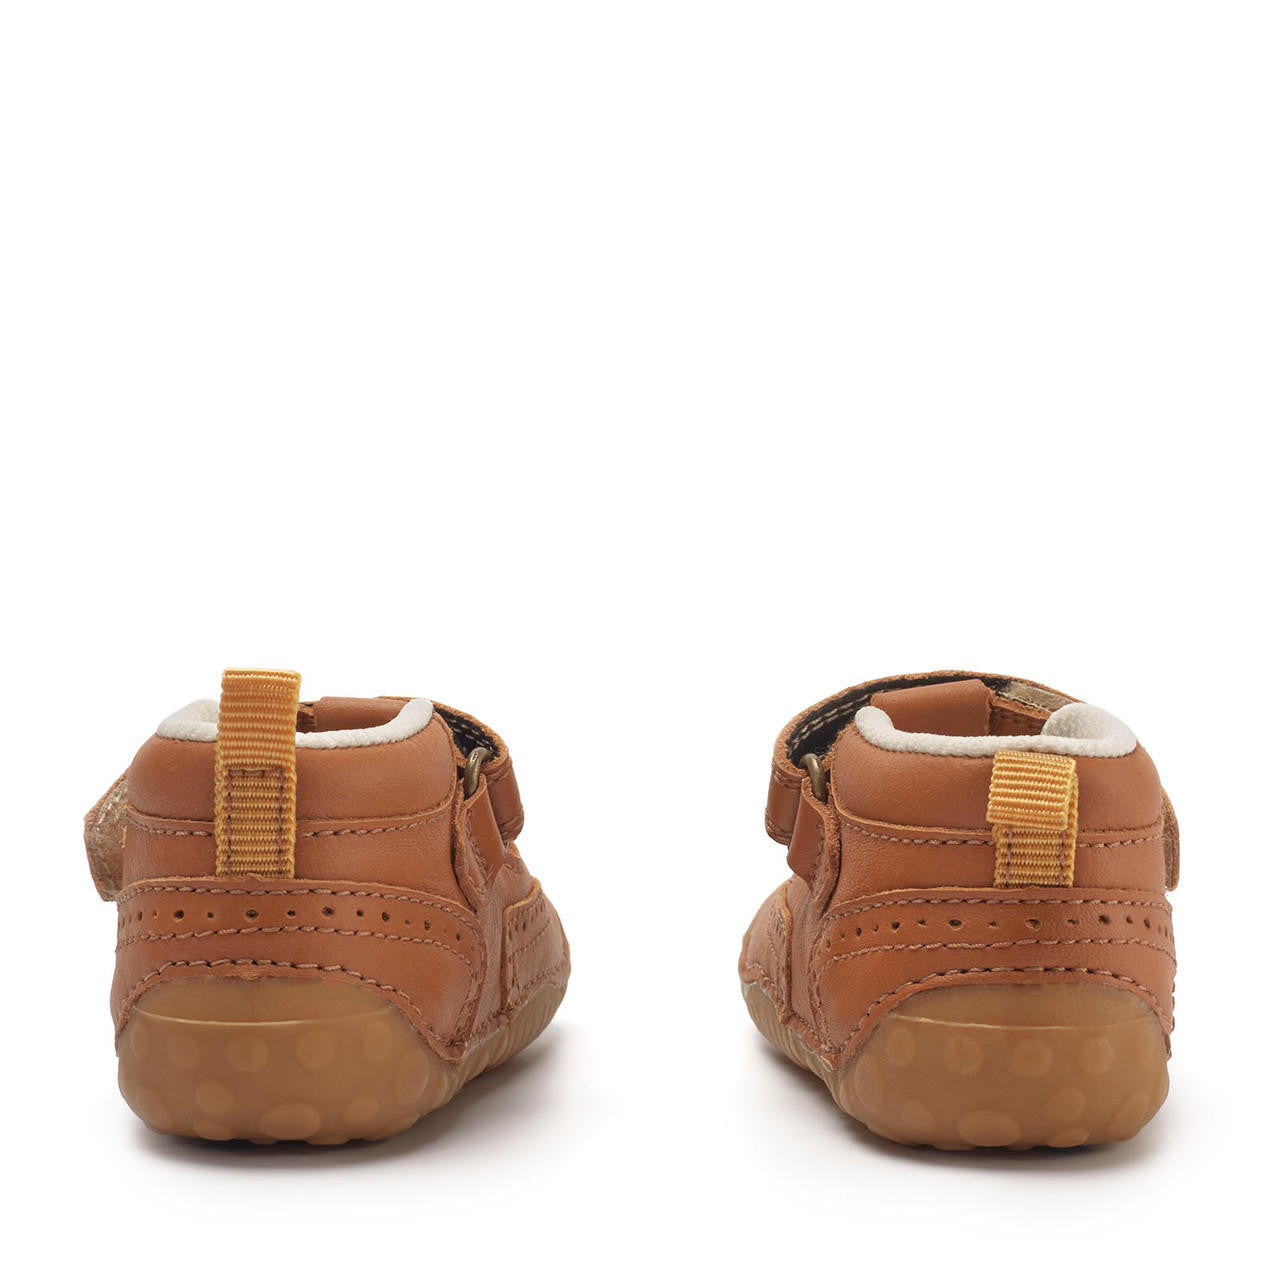 A pair of boys T-Bar pre-walkers by Start-Rite + JoJo Maman Bebe, style Share,in tan leather with brogue detail and toe bumper. Velcro fastening. View from back.